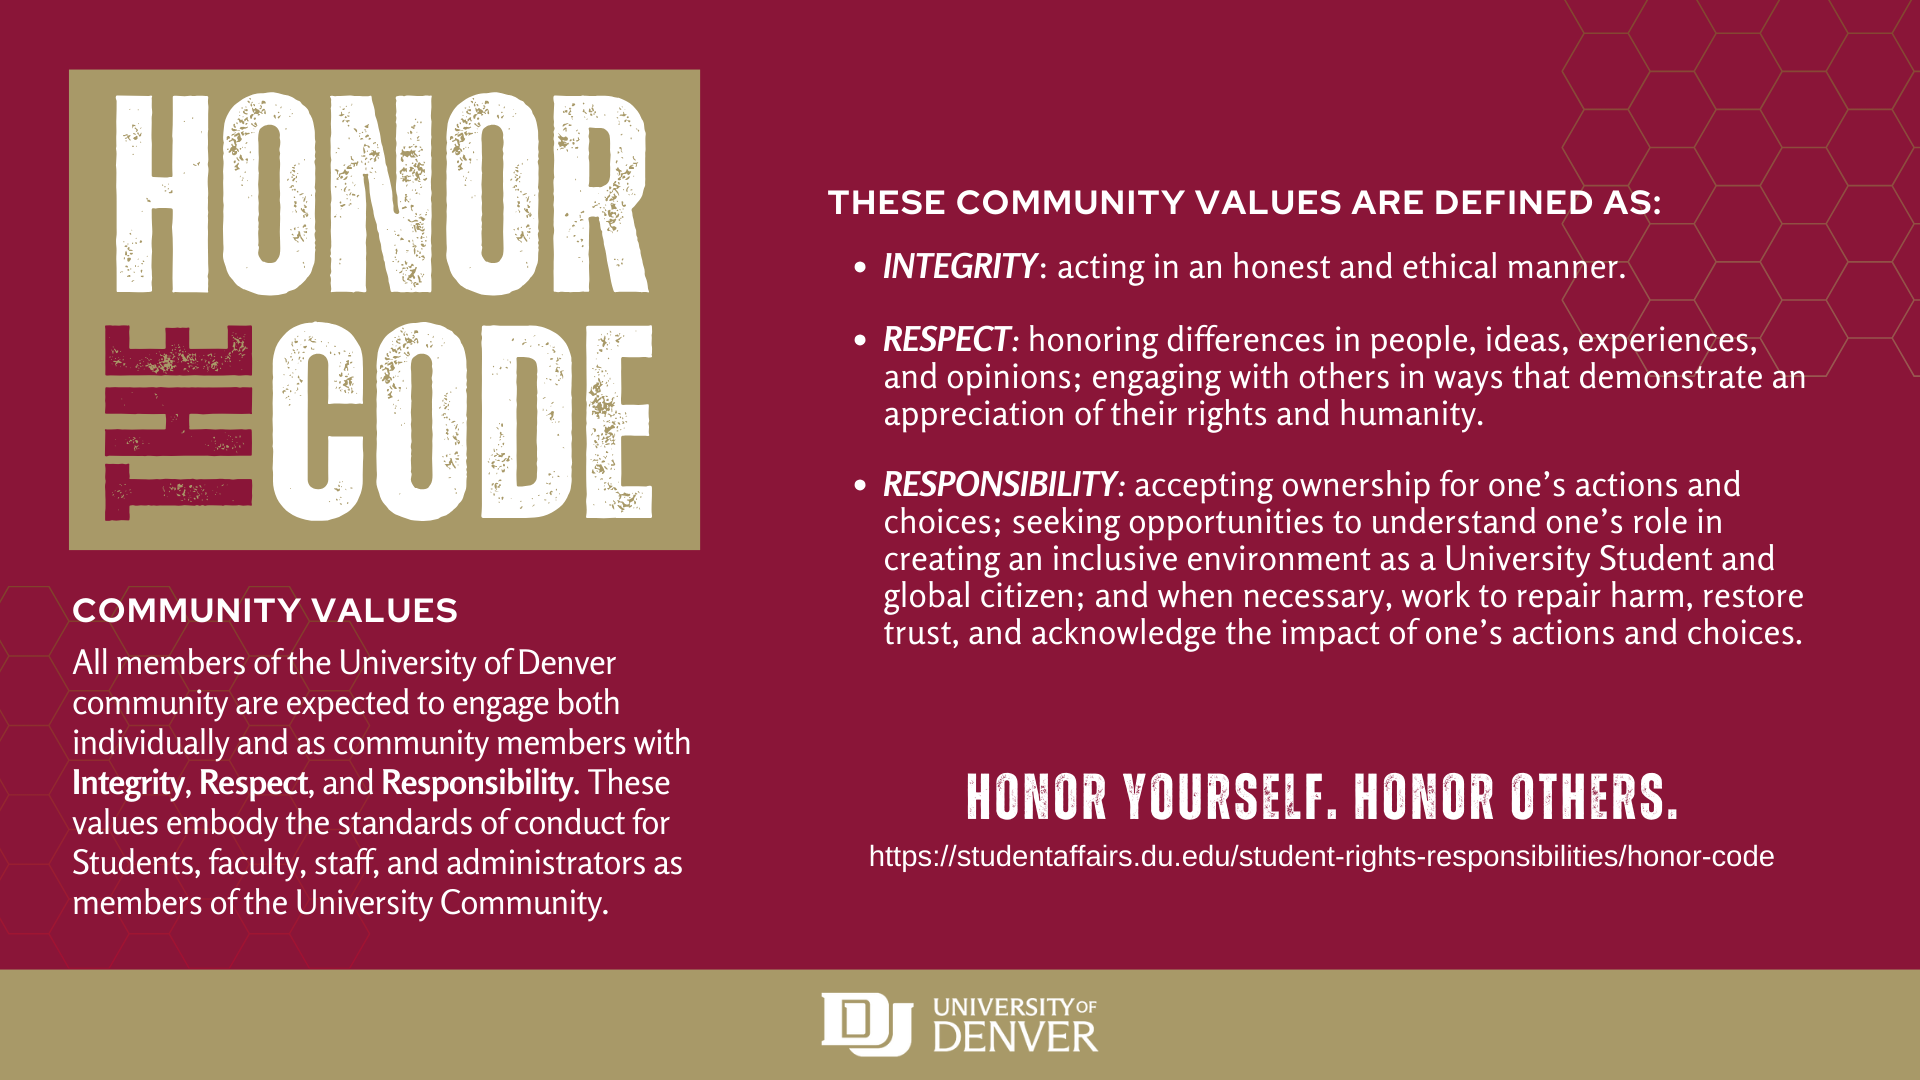 Crimson and gold graphic of the University of Denver Honor Code, which outlines Community Values and defines the Community Values.